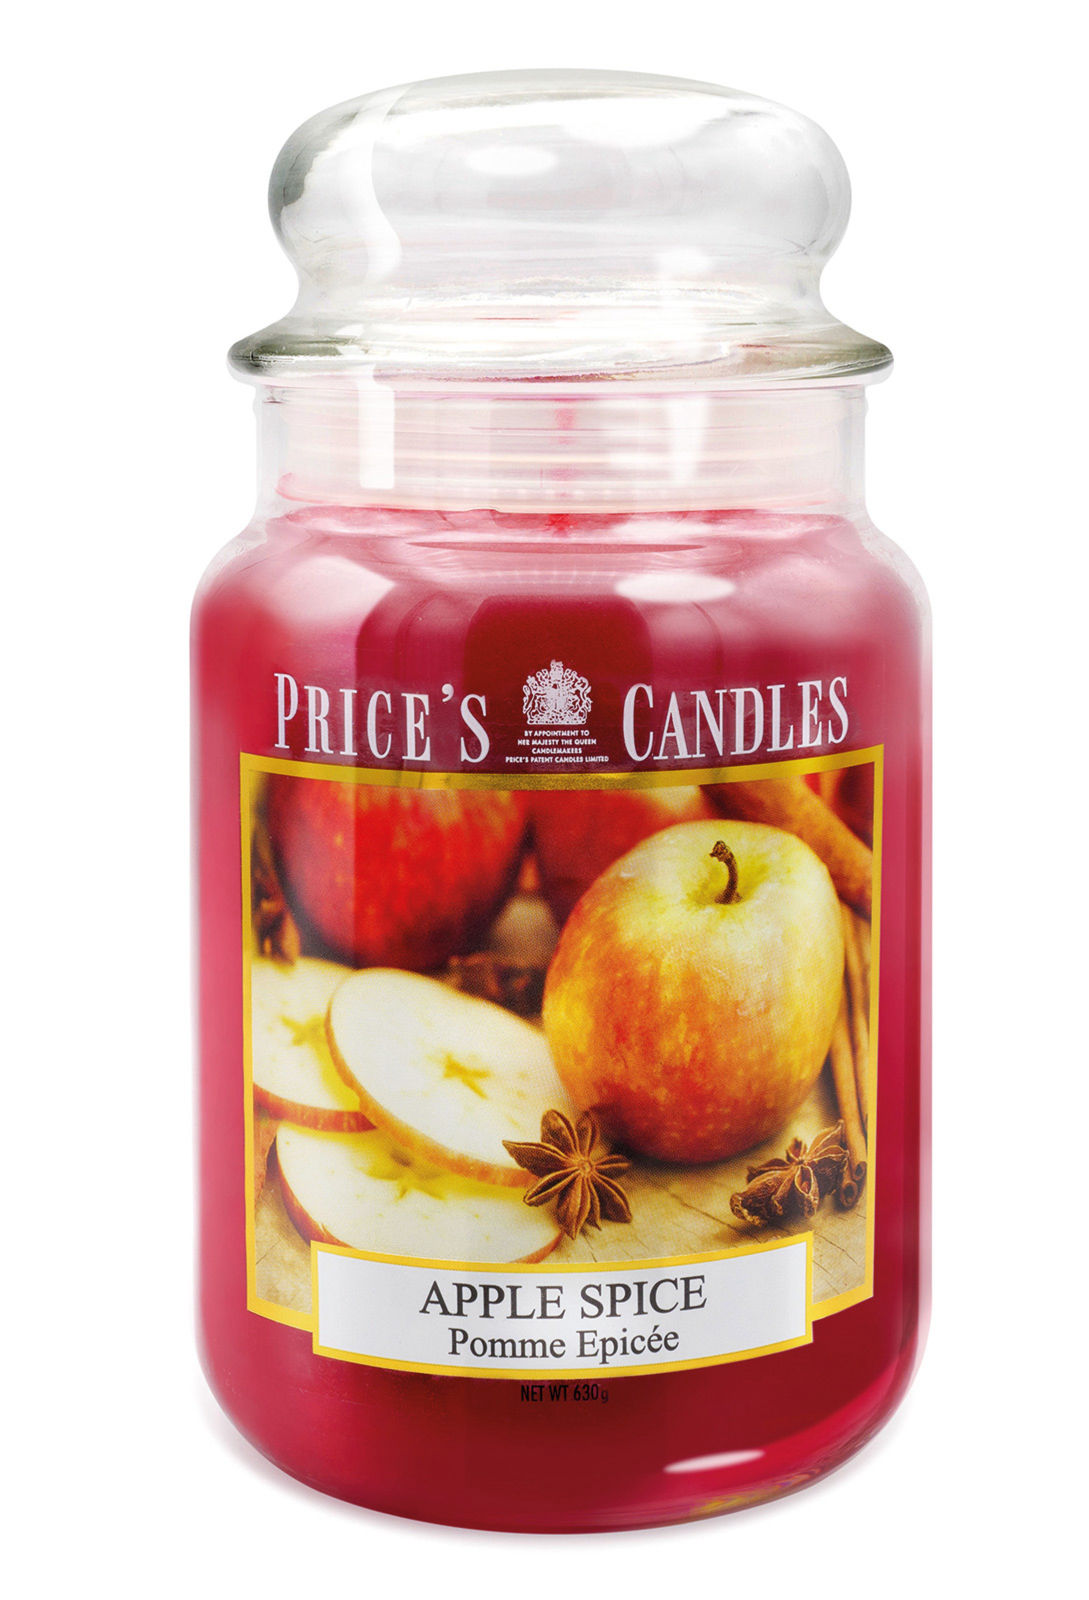 Prices Candle "Apple Spice" 630g